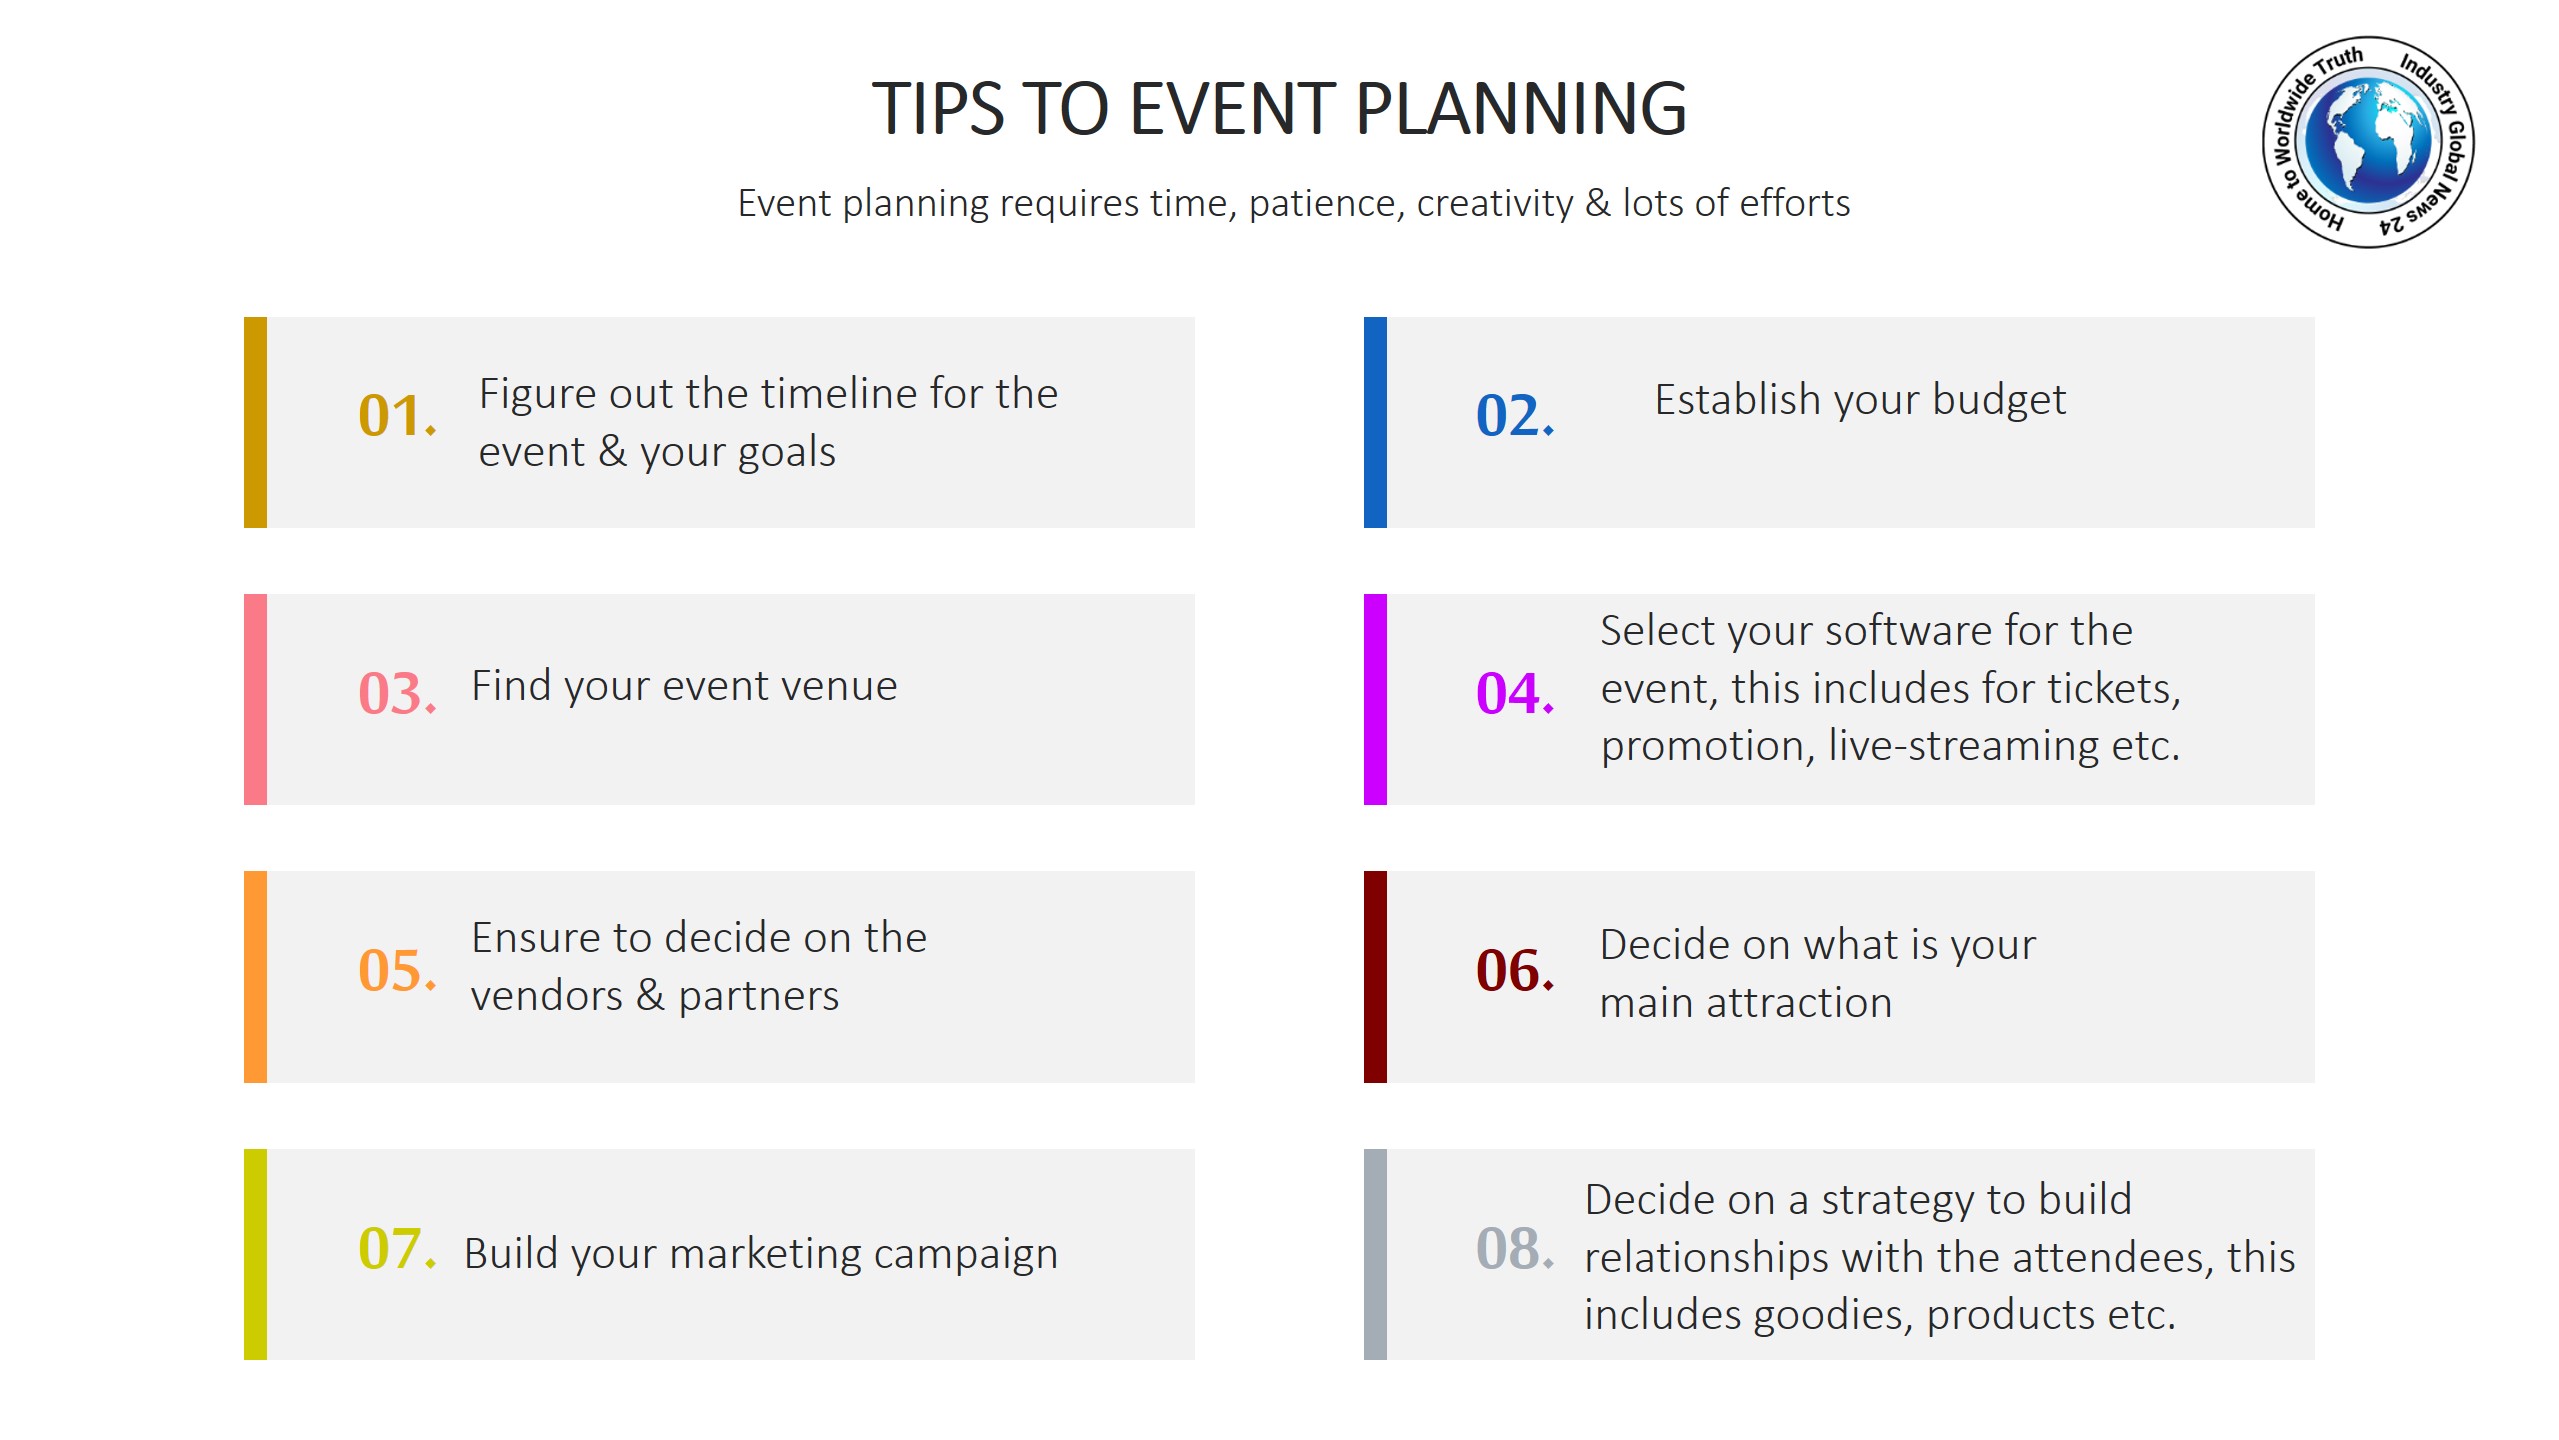 Tips to event planning